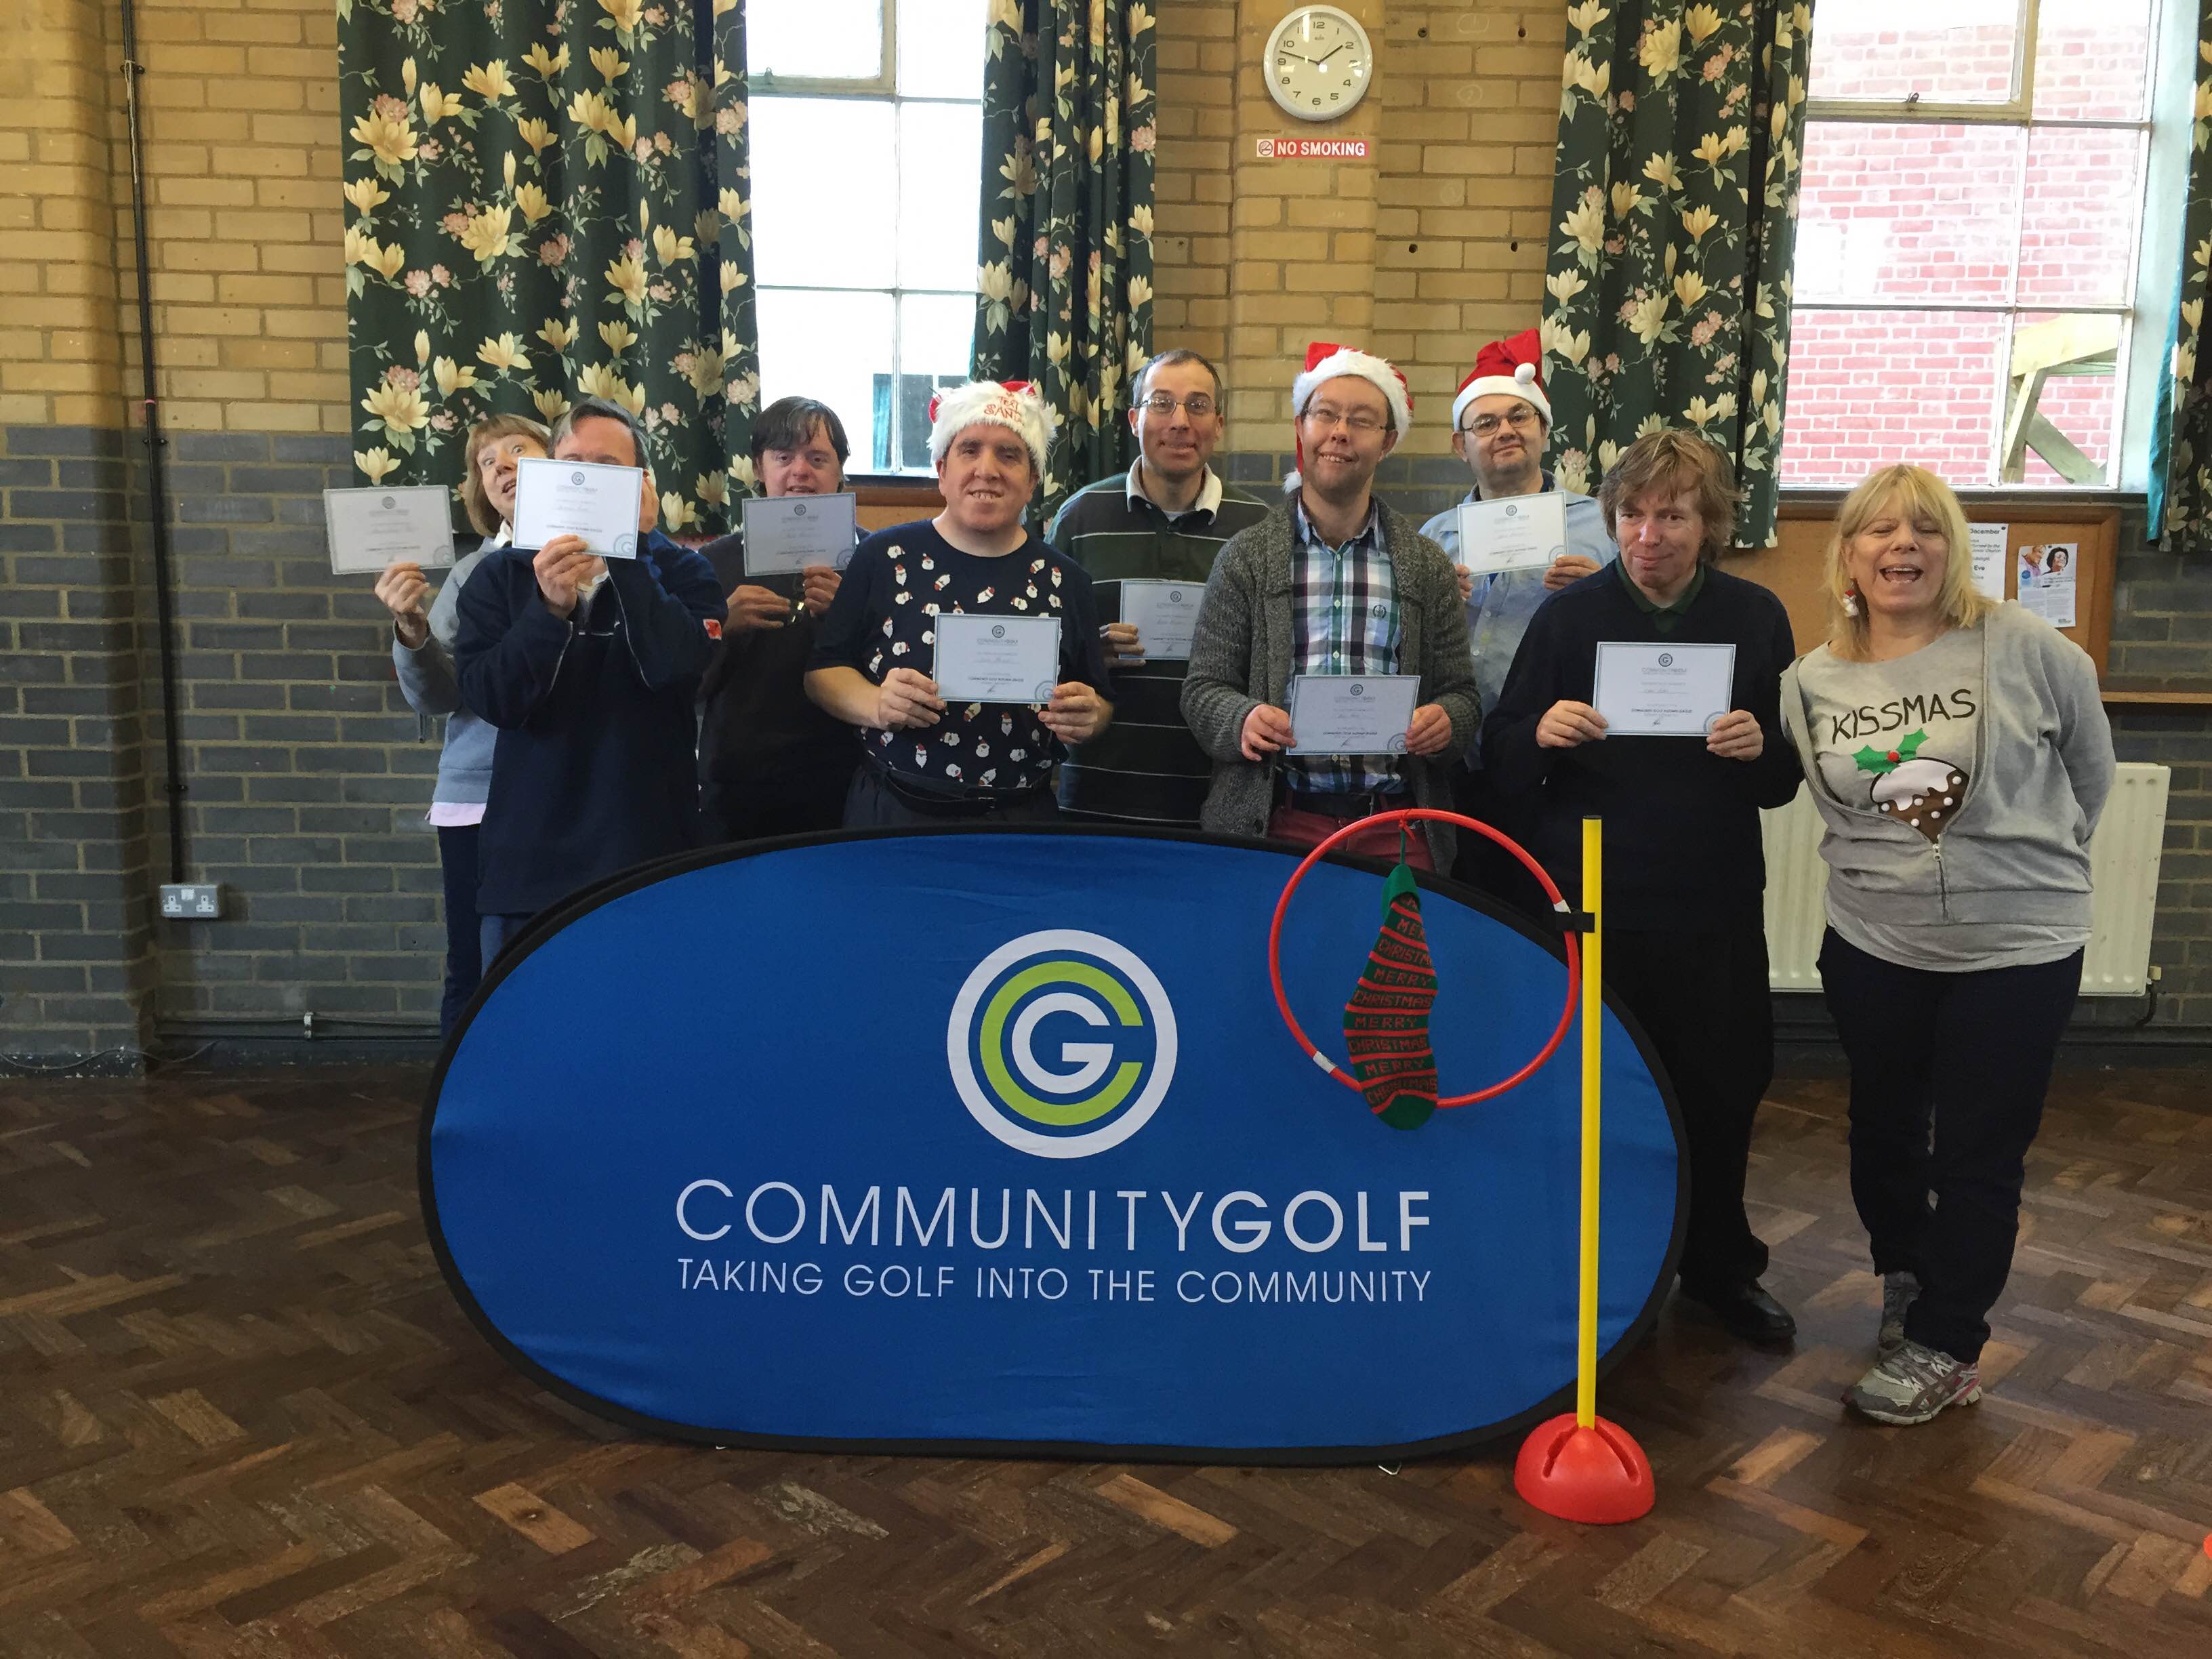 A group of customers all wearing Christmas hats or jumpers holding their Community Golf certificates